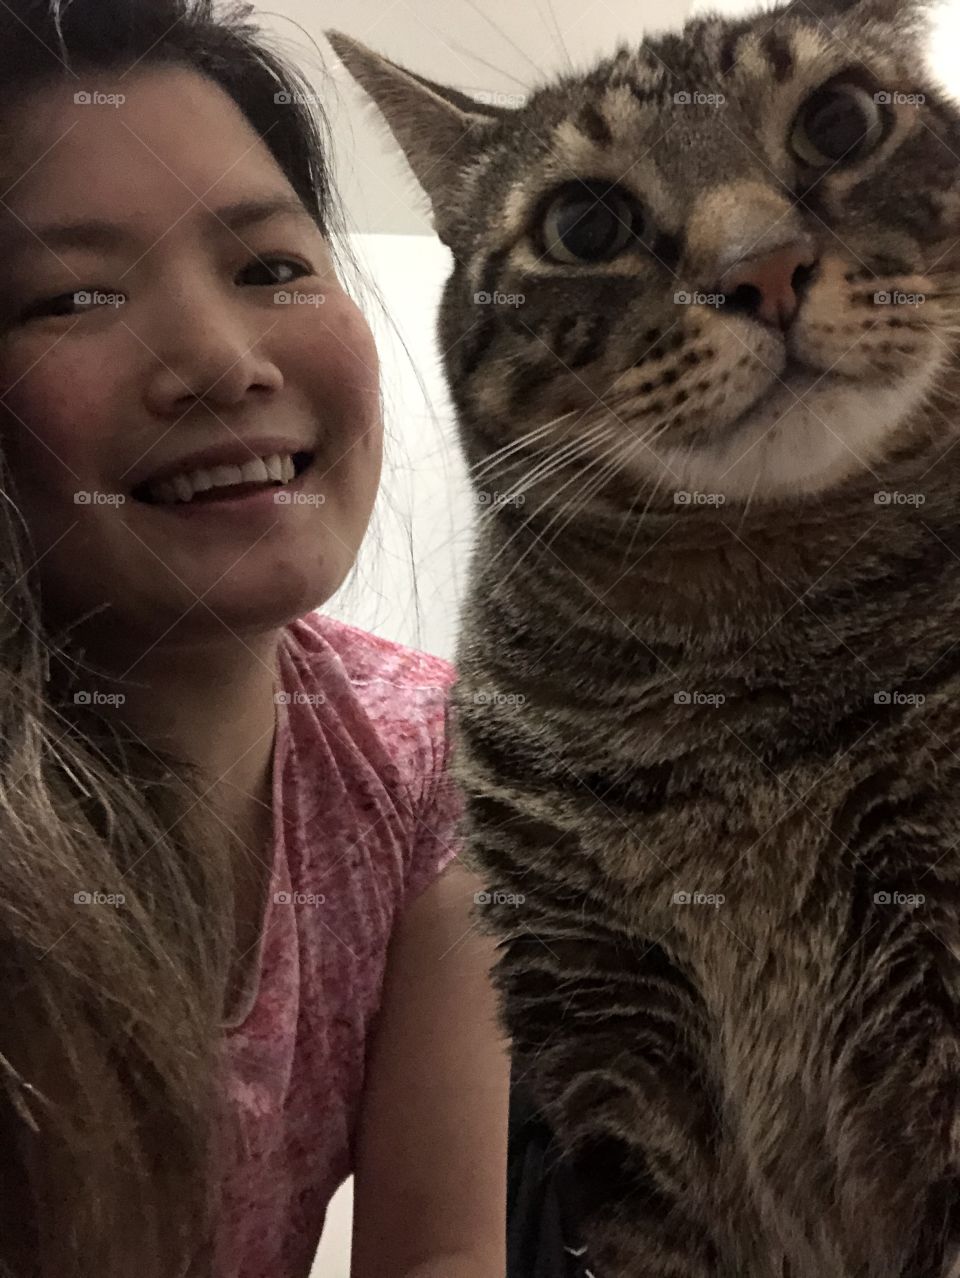 "selfie with my human"